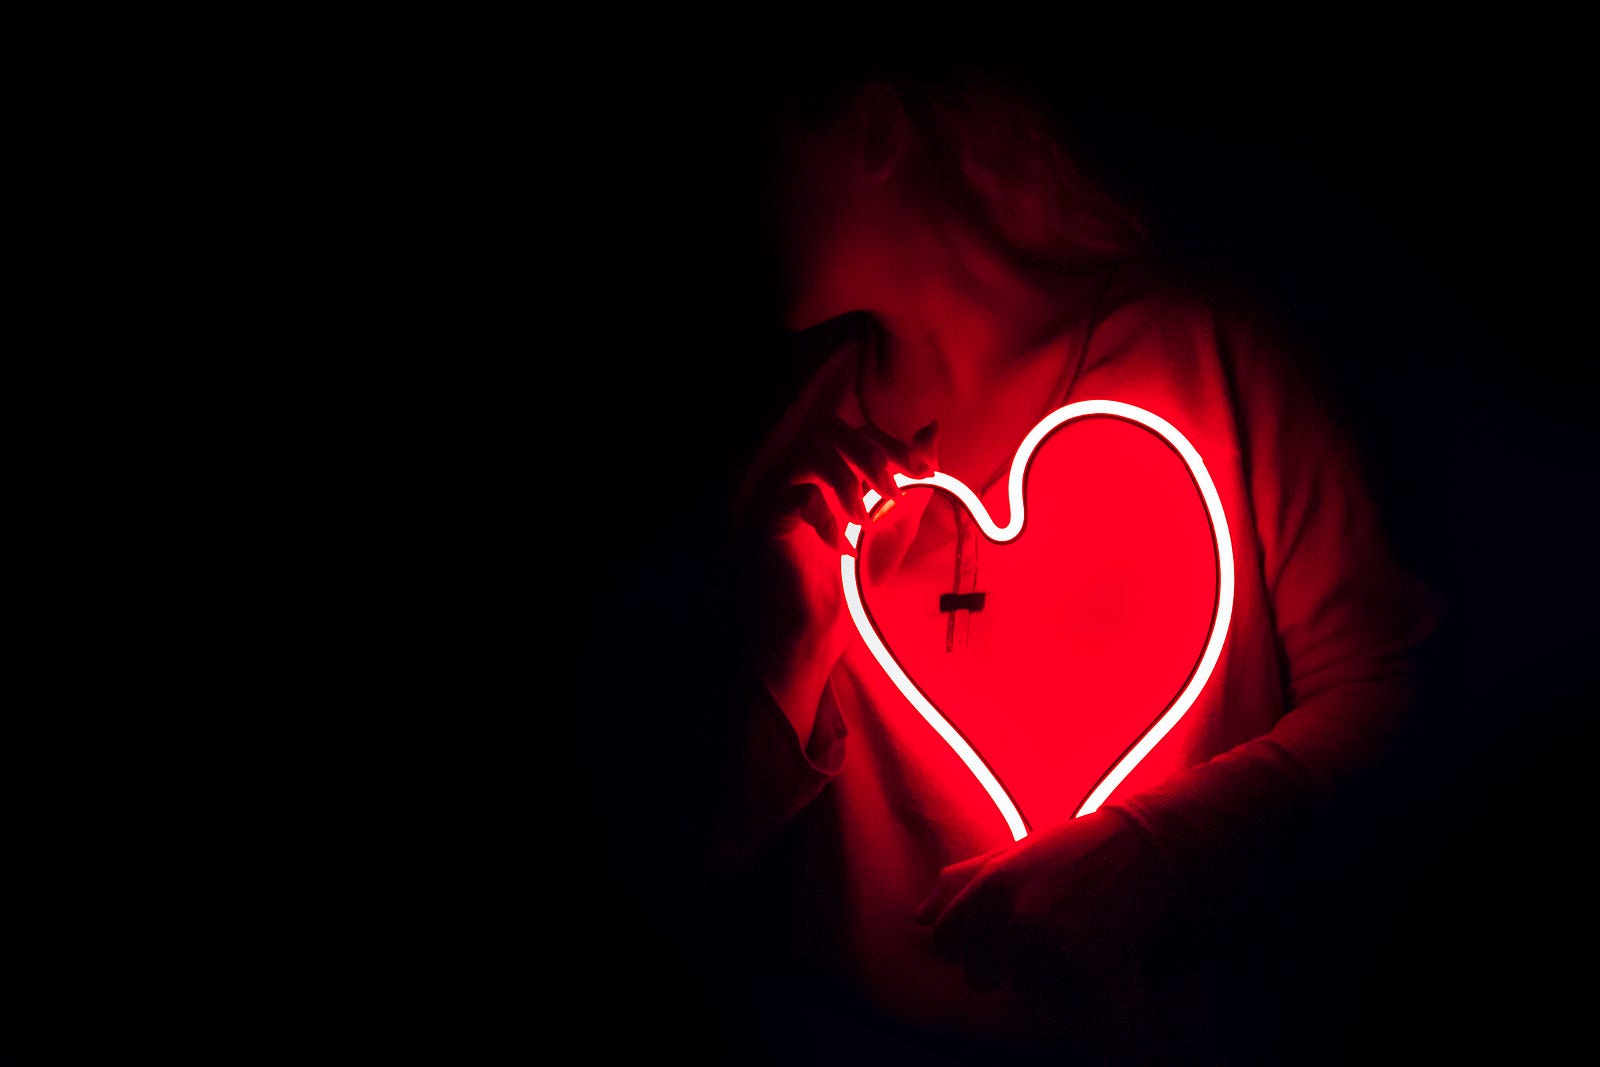 A woman (in the dark) clutches a neon heart over her left chest. Some metabolites protect against cardiovascular disease, while others cause harm.